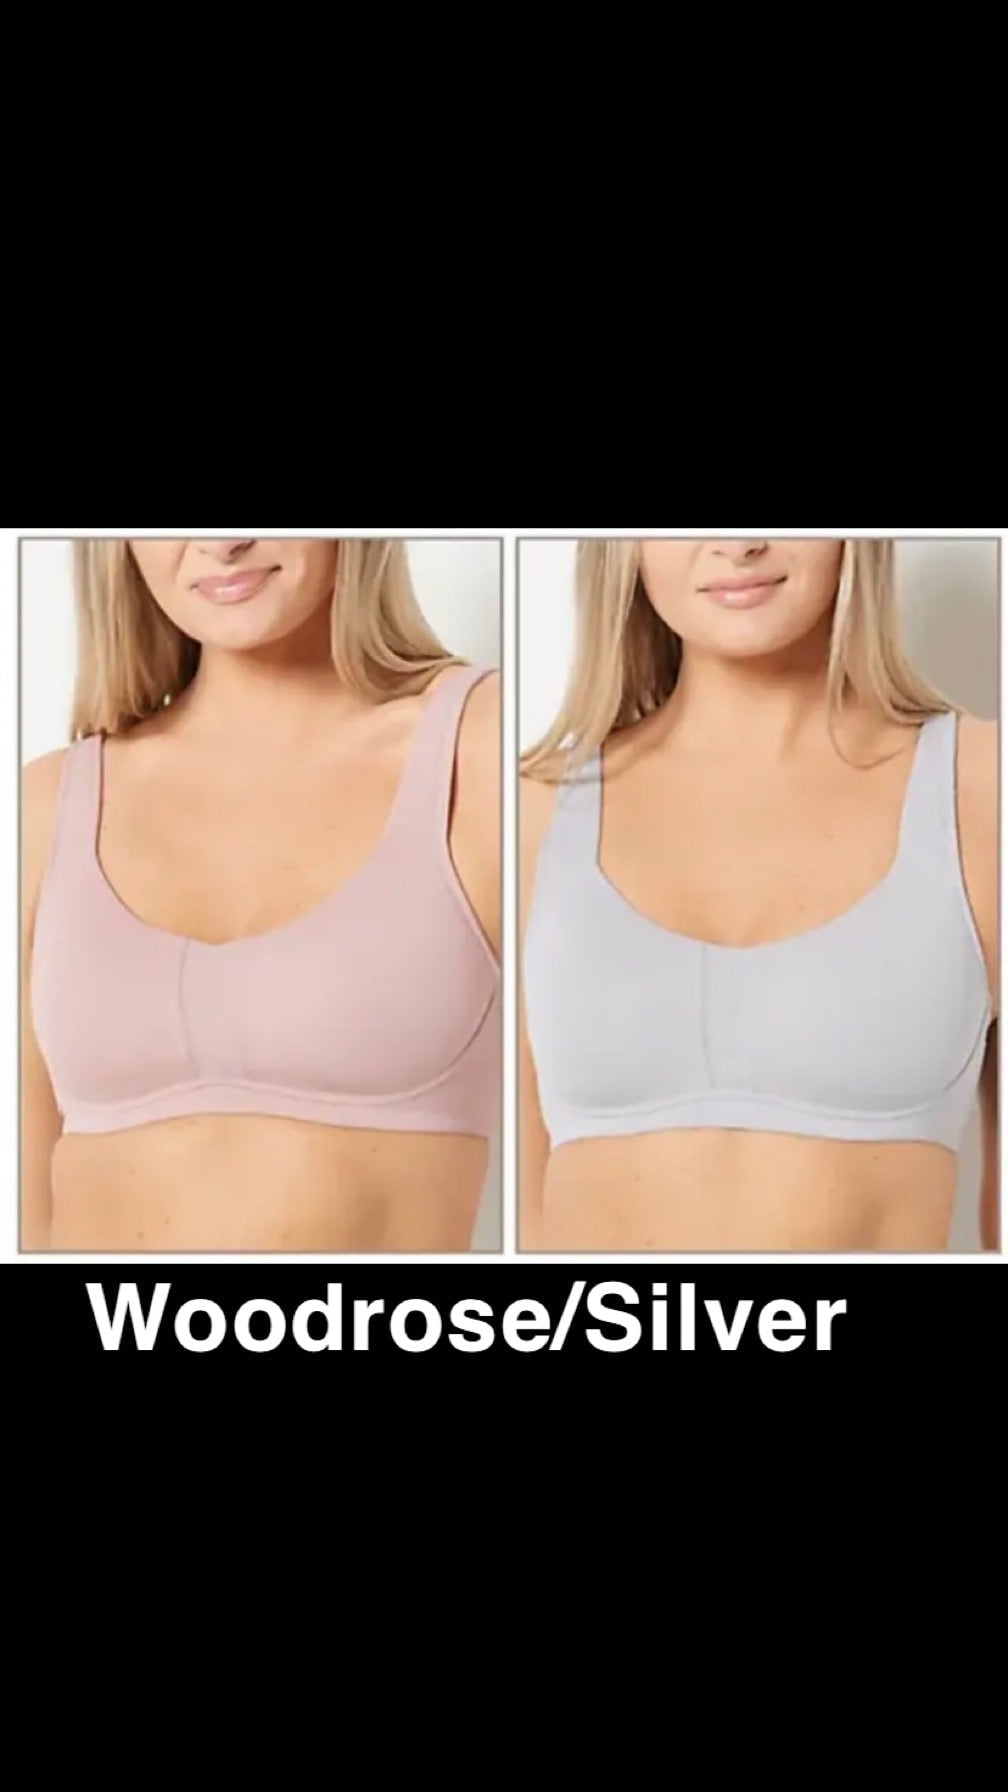 Cuddl Duds Smooth Micro Scoop Neck Wirefree Bra~X-Large~A463940~Foam Cups  395